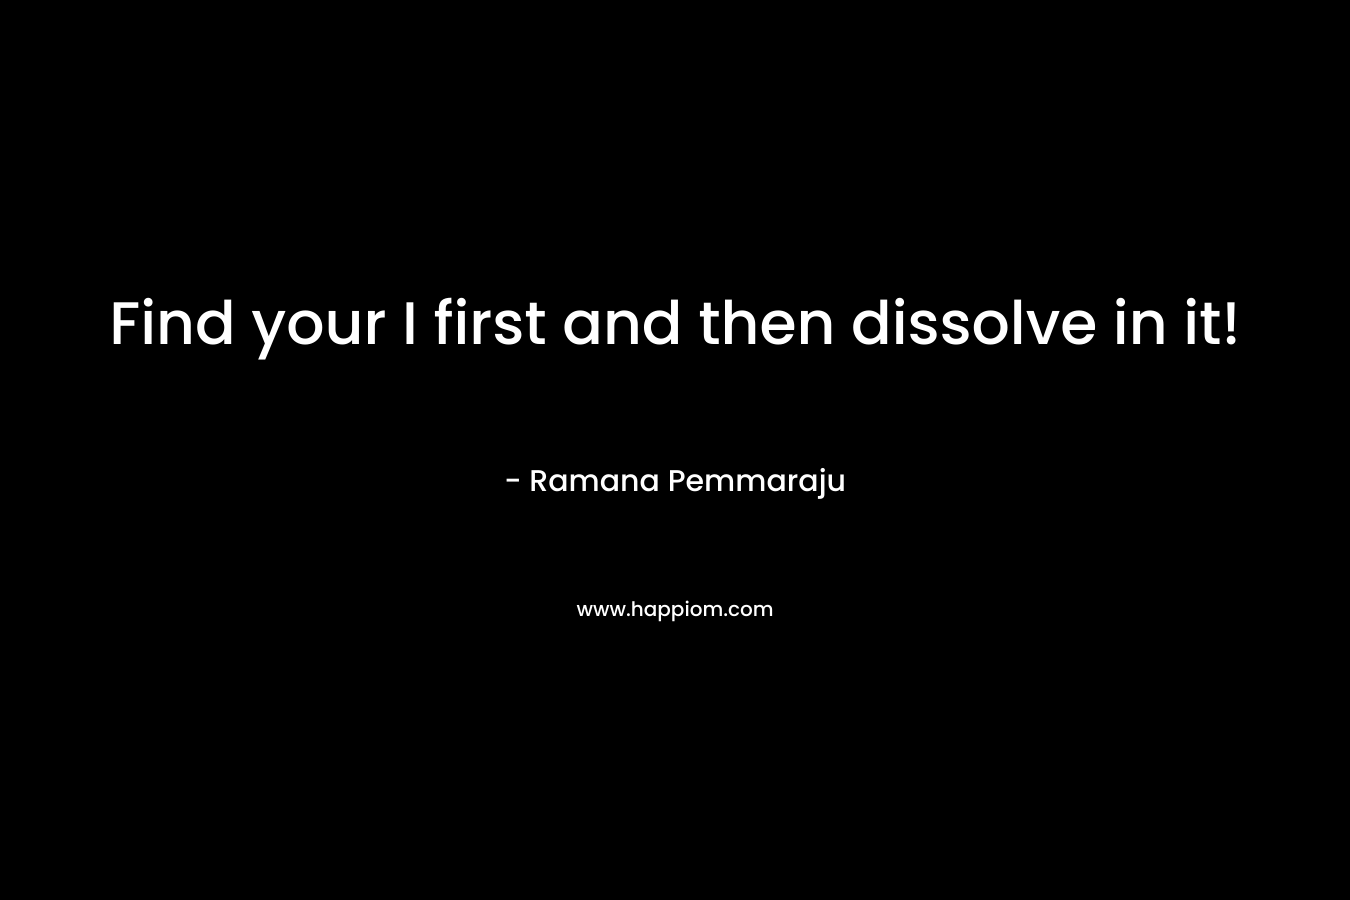 Find your I first and then dissolve in it!